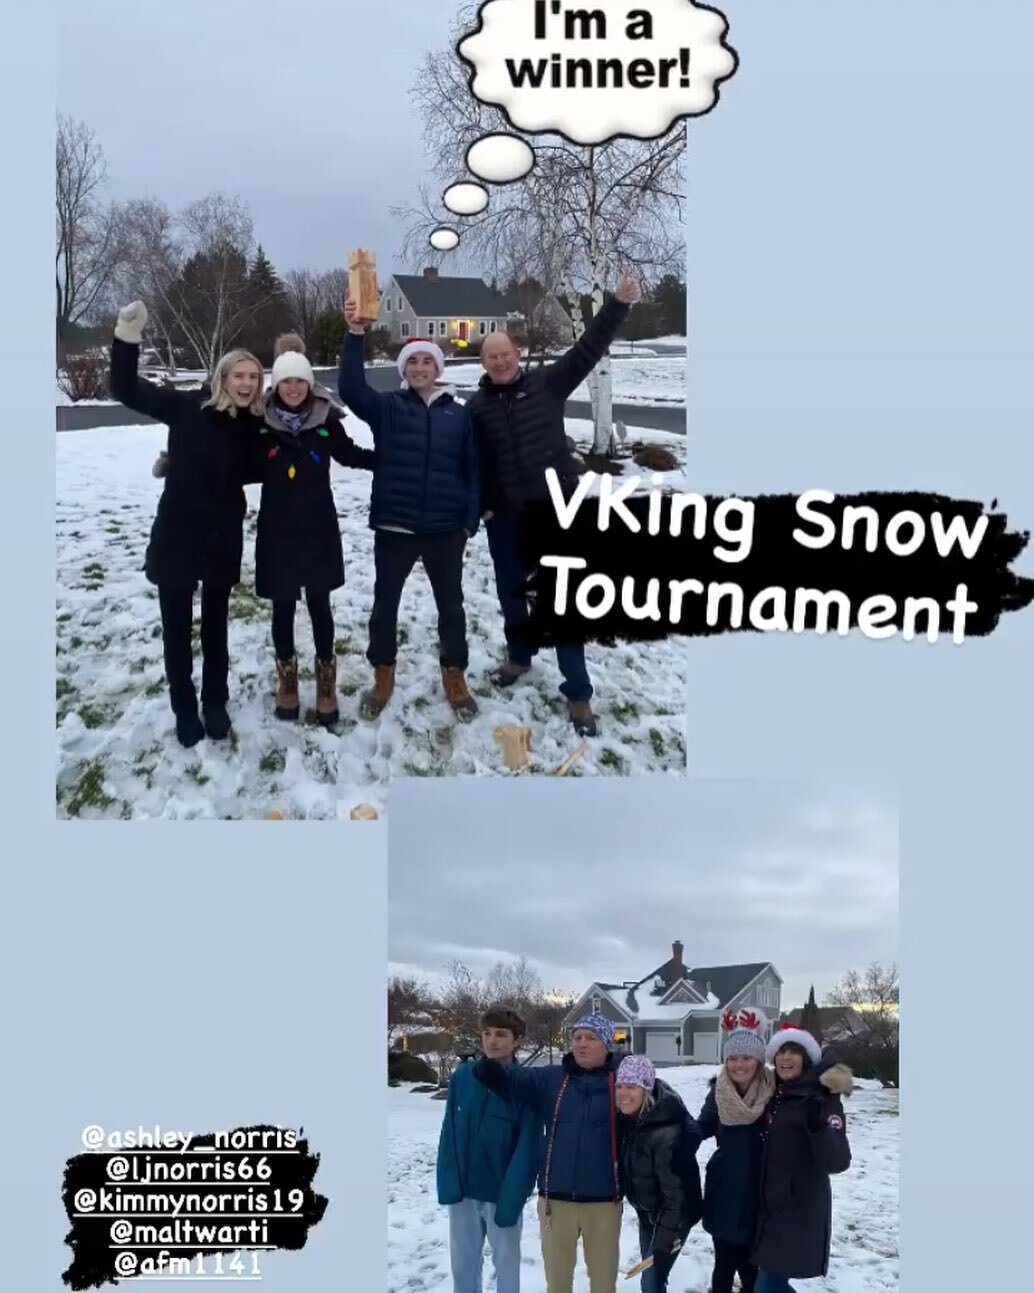 Winter V:King tournament! What better way to ring in 2022?! ❄️❄️